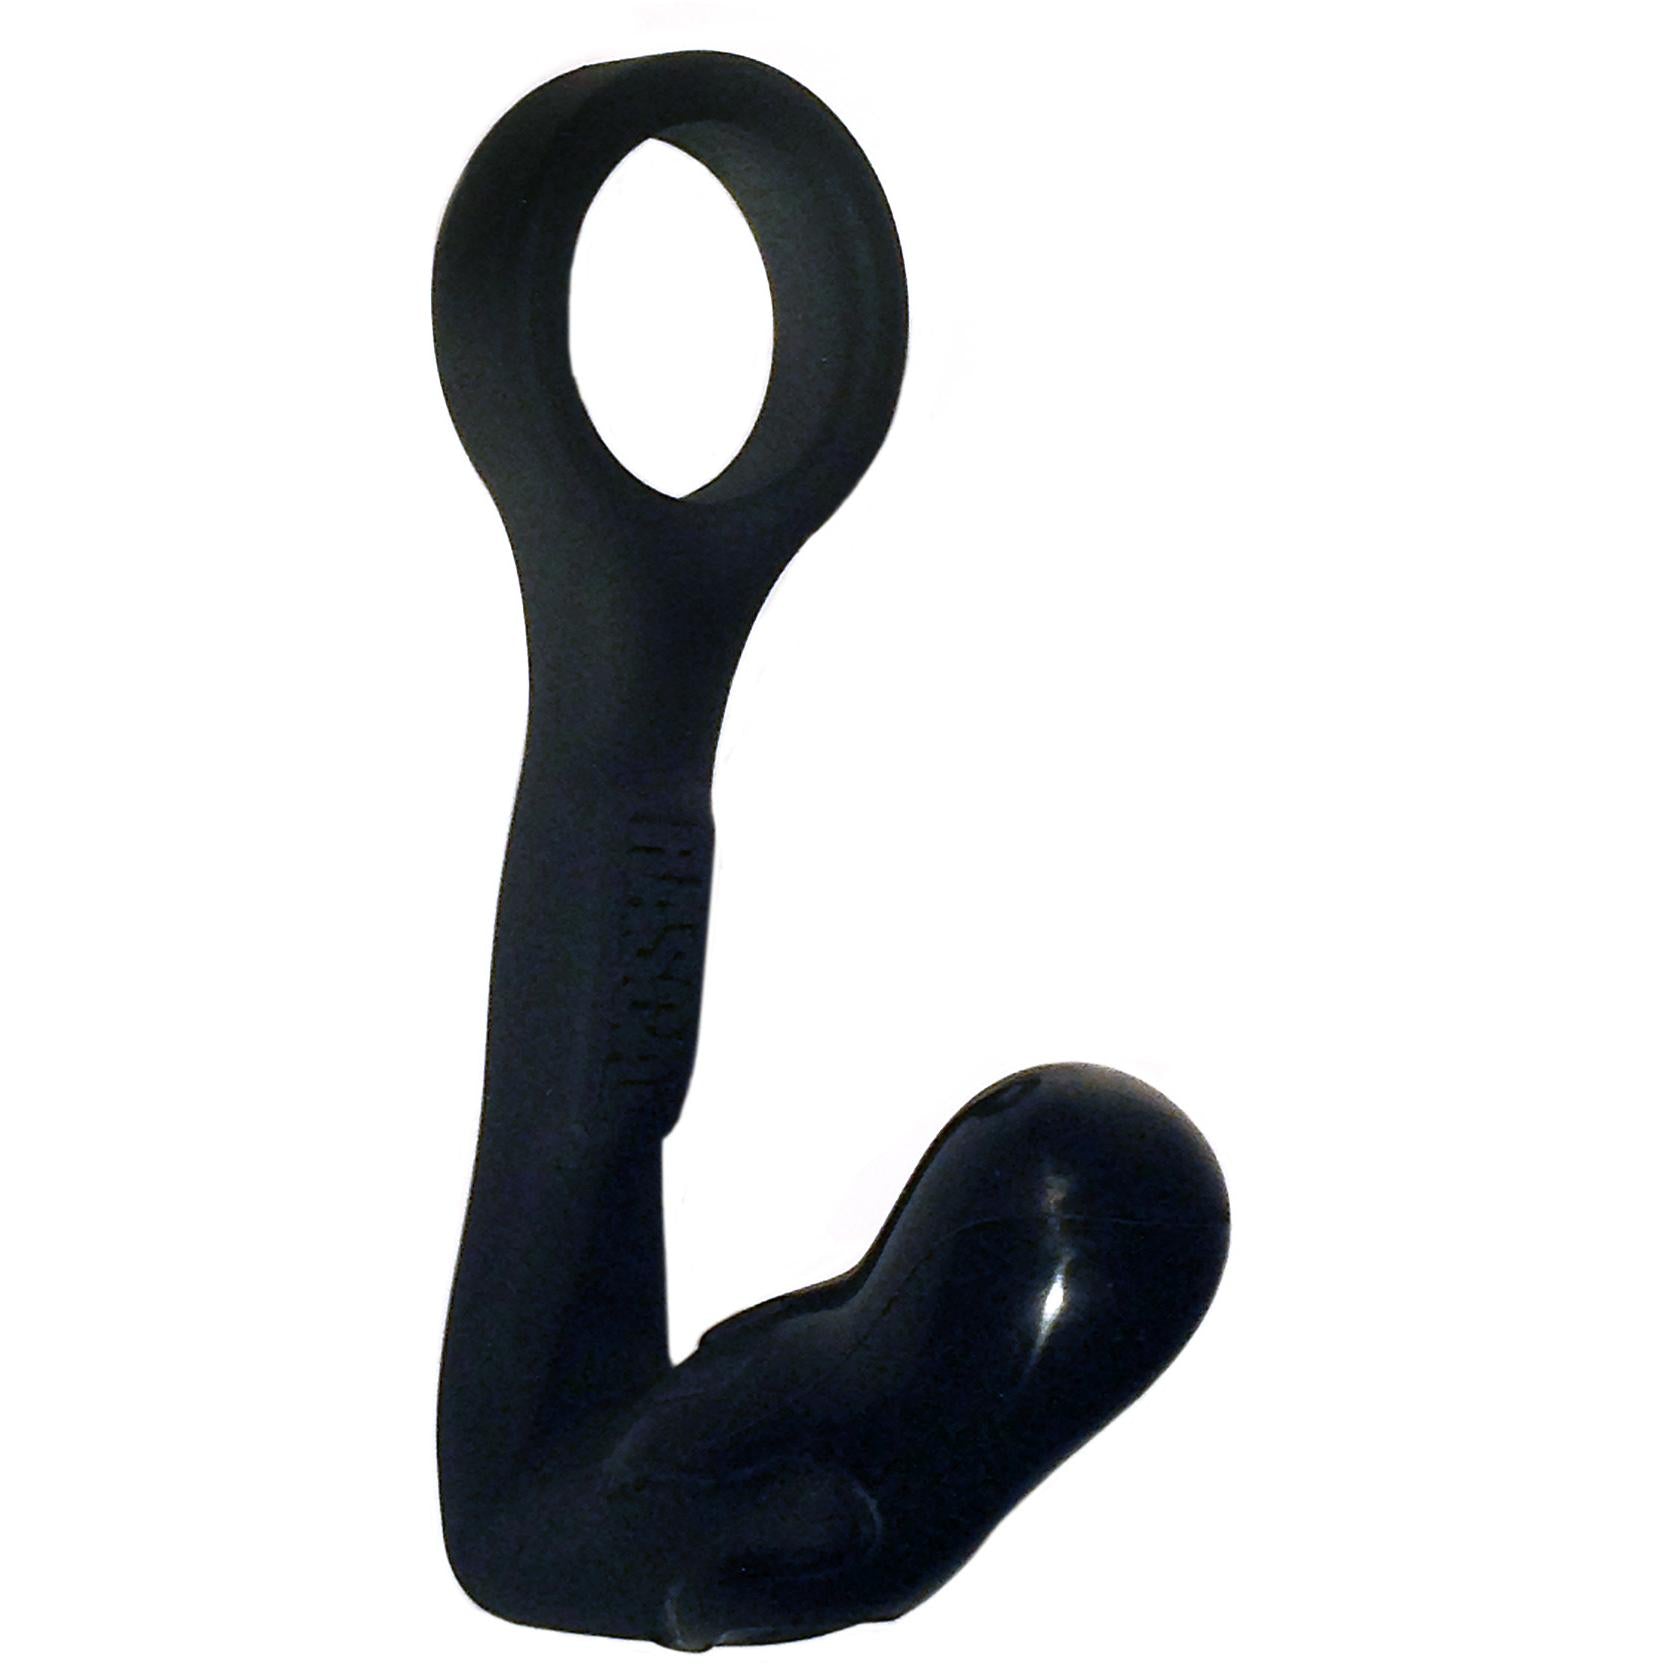 The Clencher Cock Ring & Butt Plug